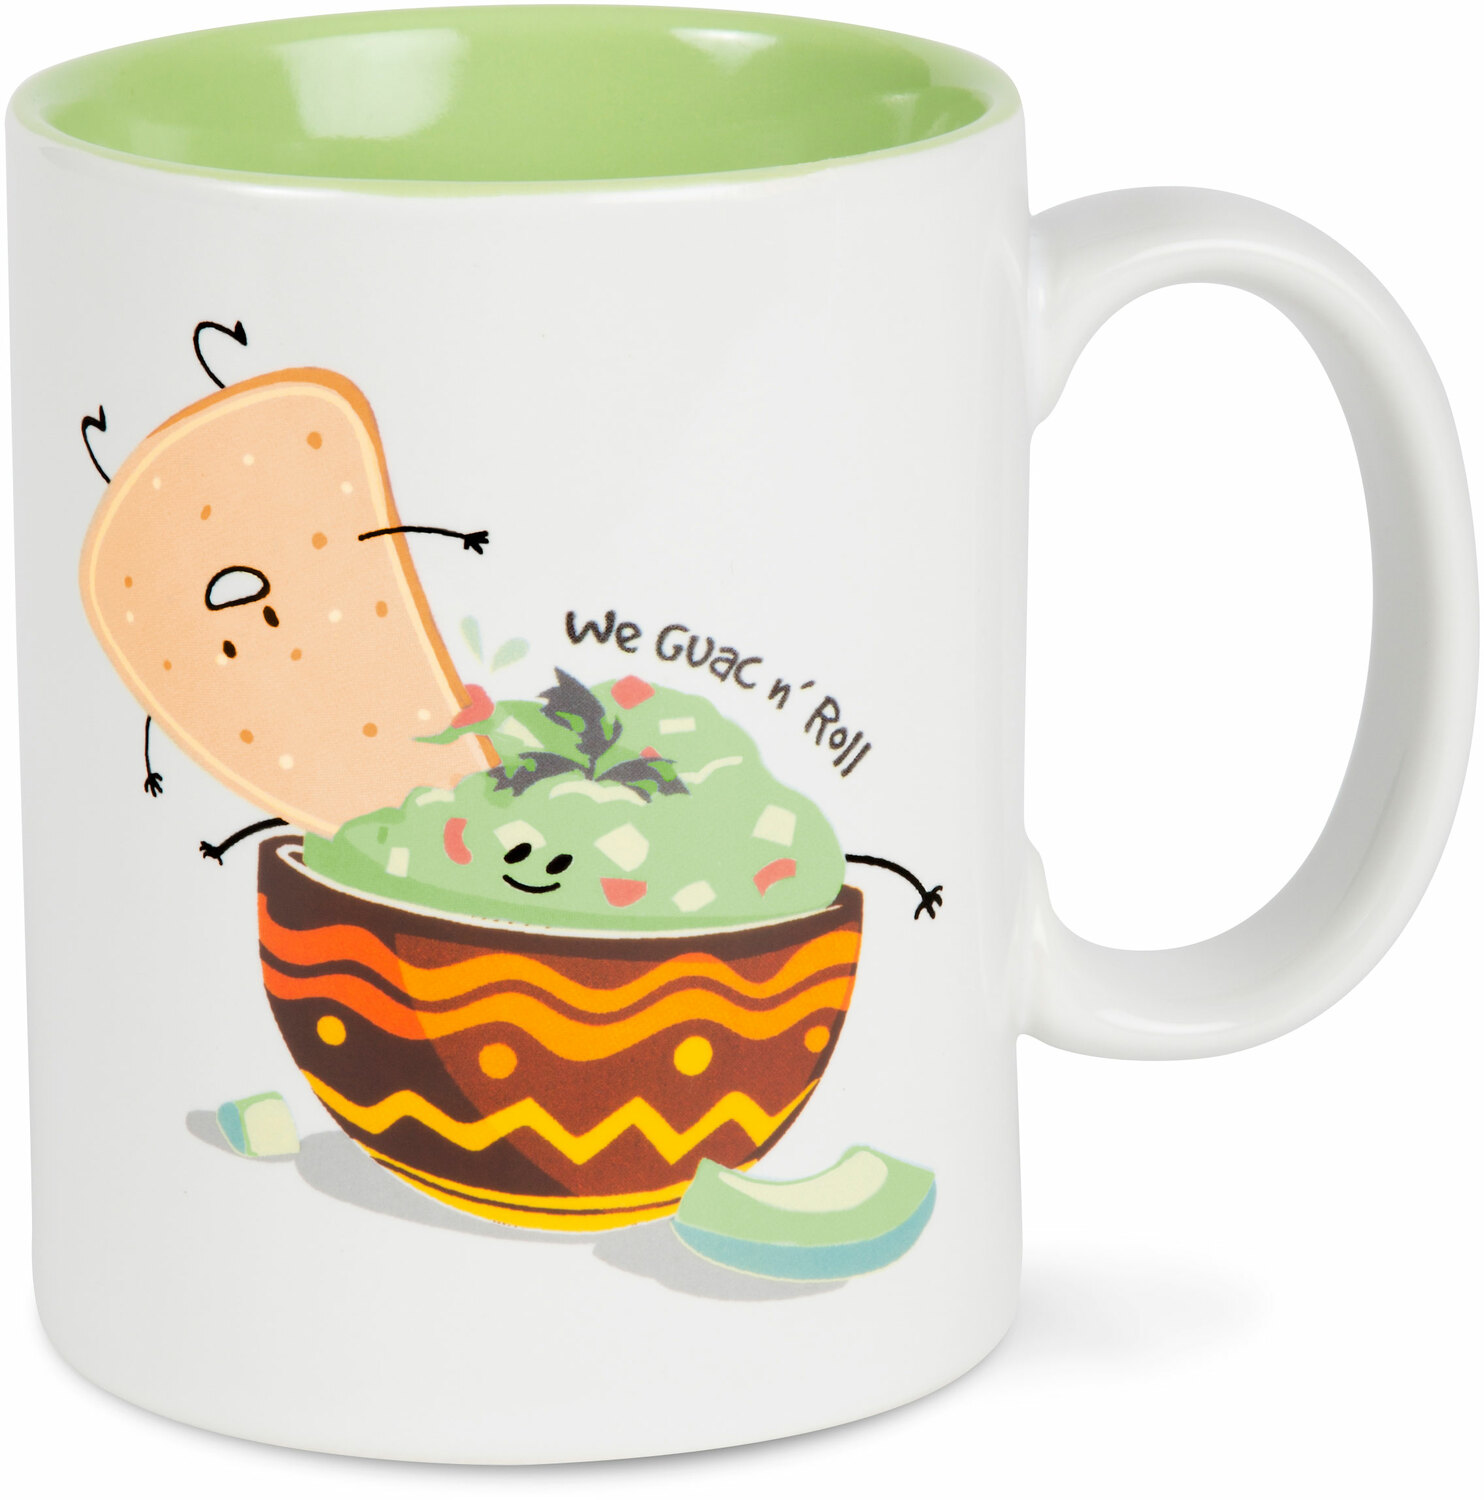 Chips and Guac by Late Night Snacks - Chips and Guac - 18 oz Mug